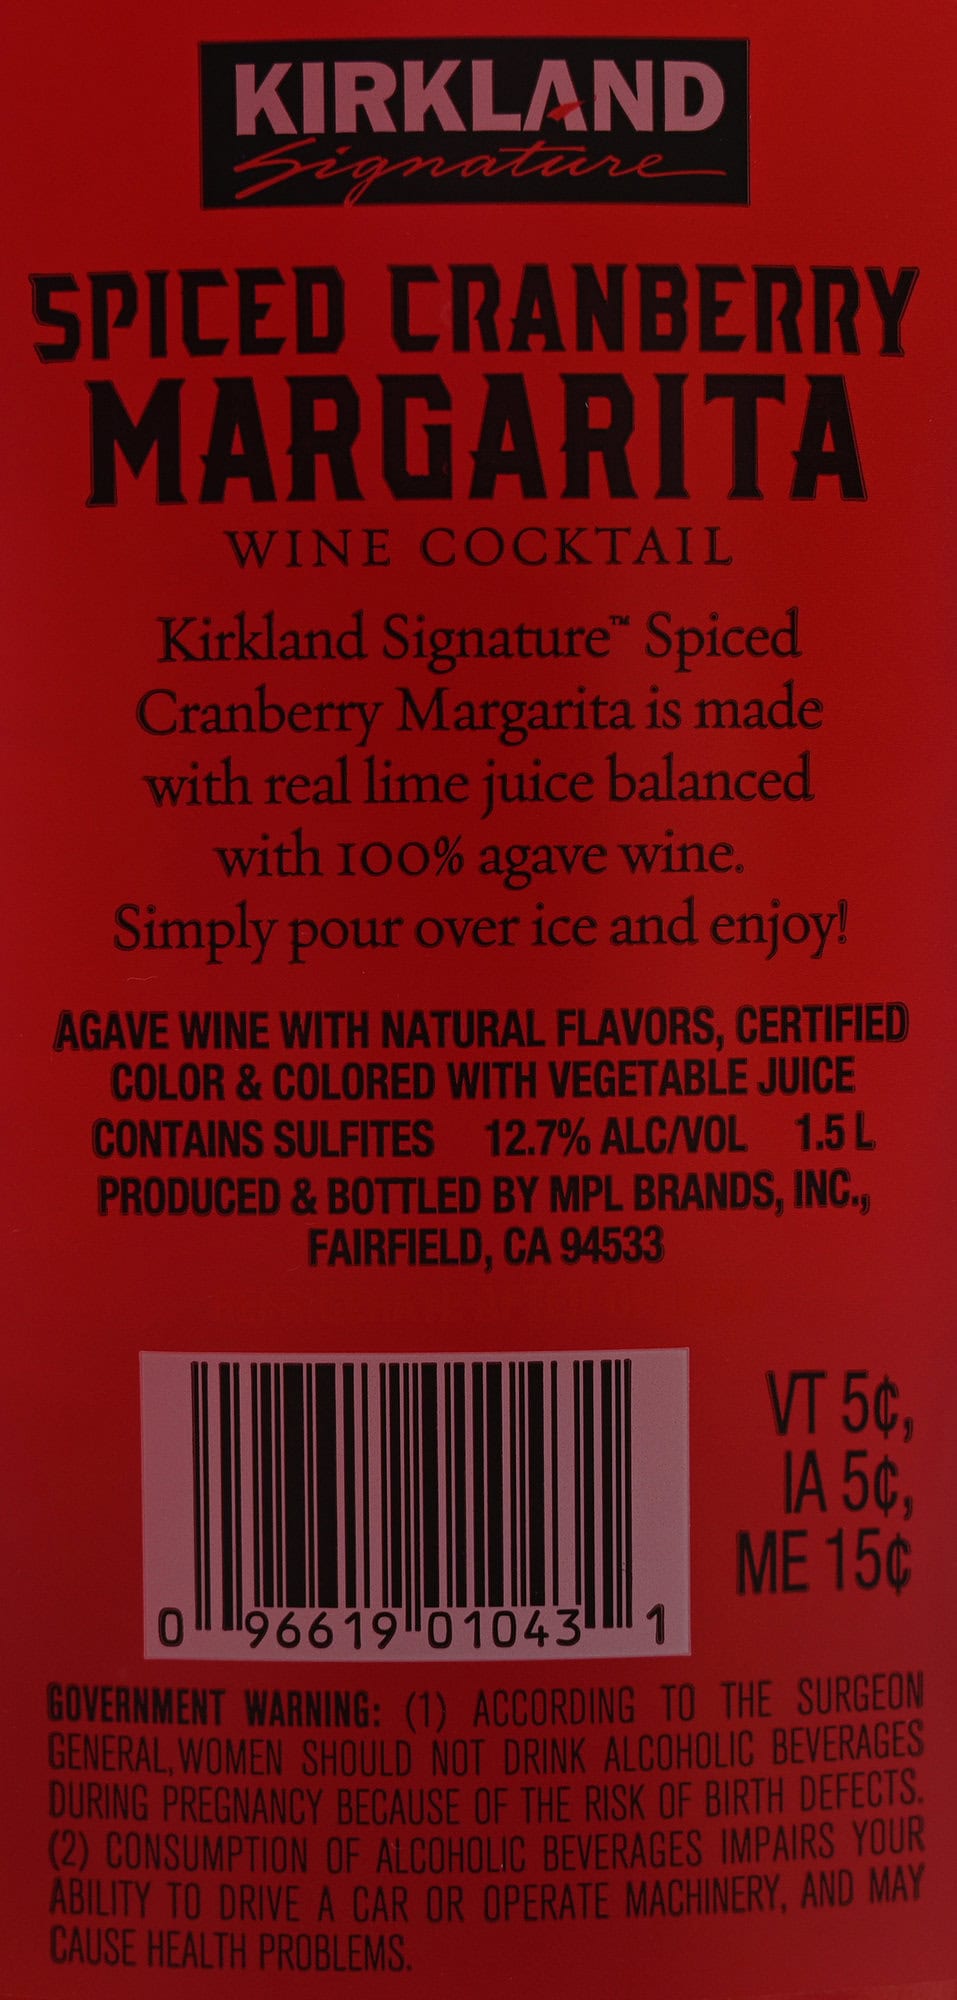 Image of the back of the golden margarita wine cocktail bottle showing the alcohol percentage and ingredients